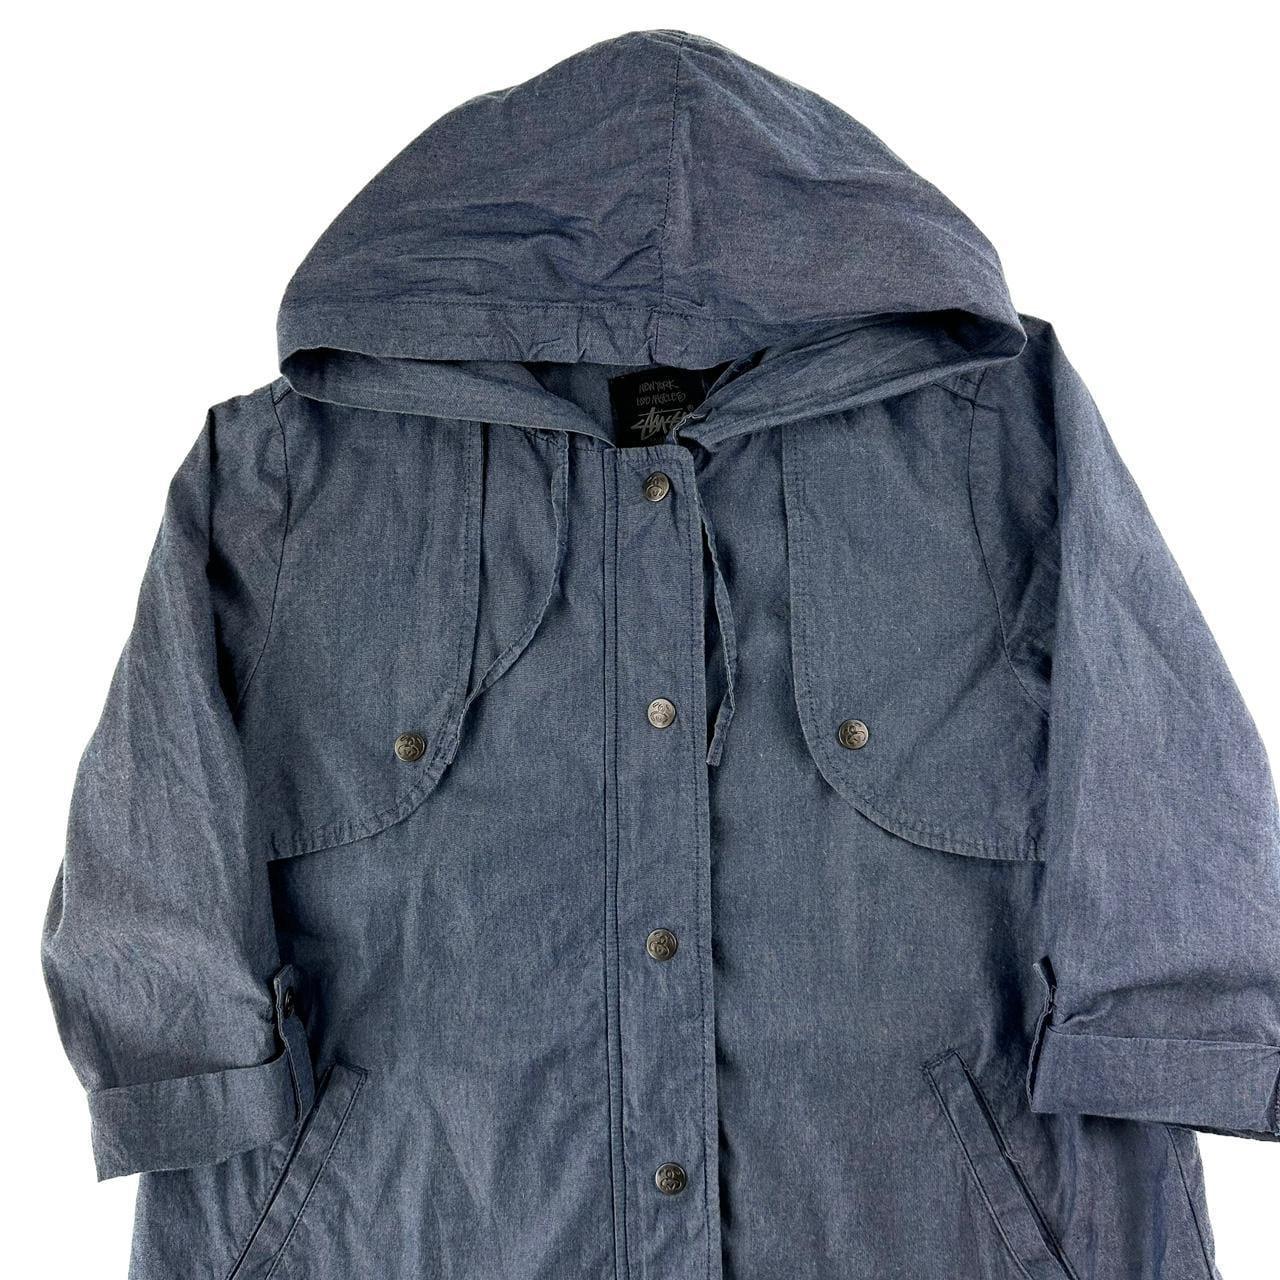 Stussy jacket woman’s size S - Known Source